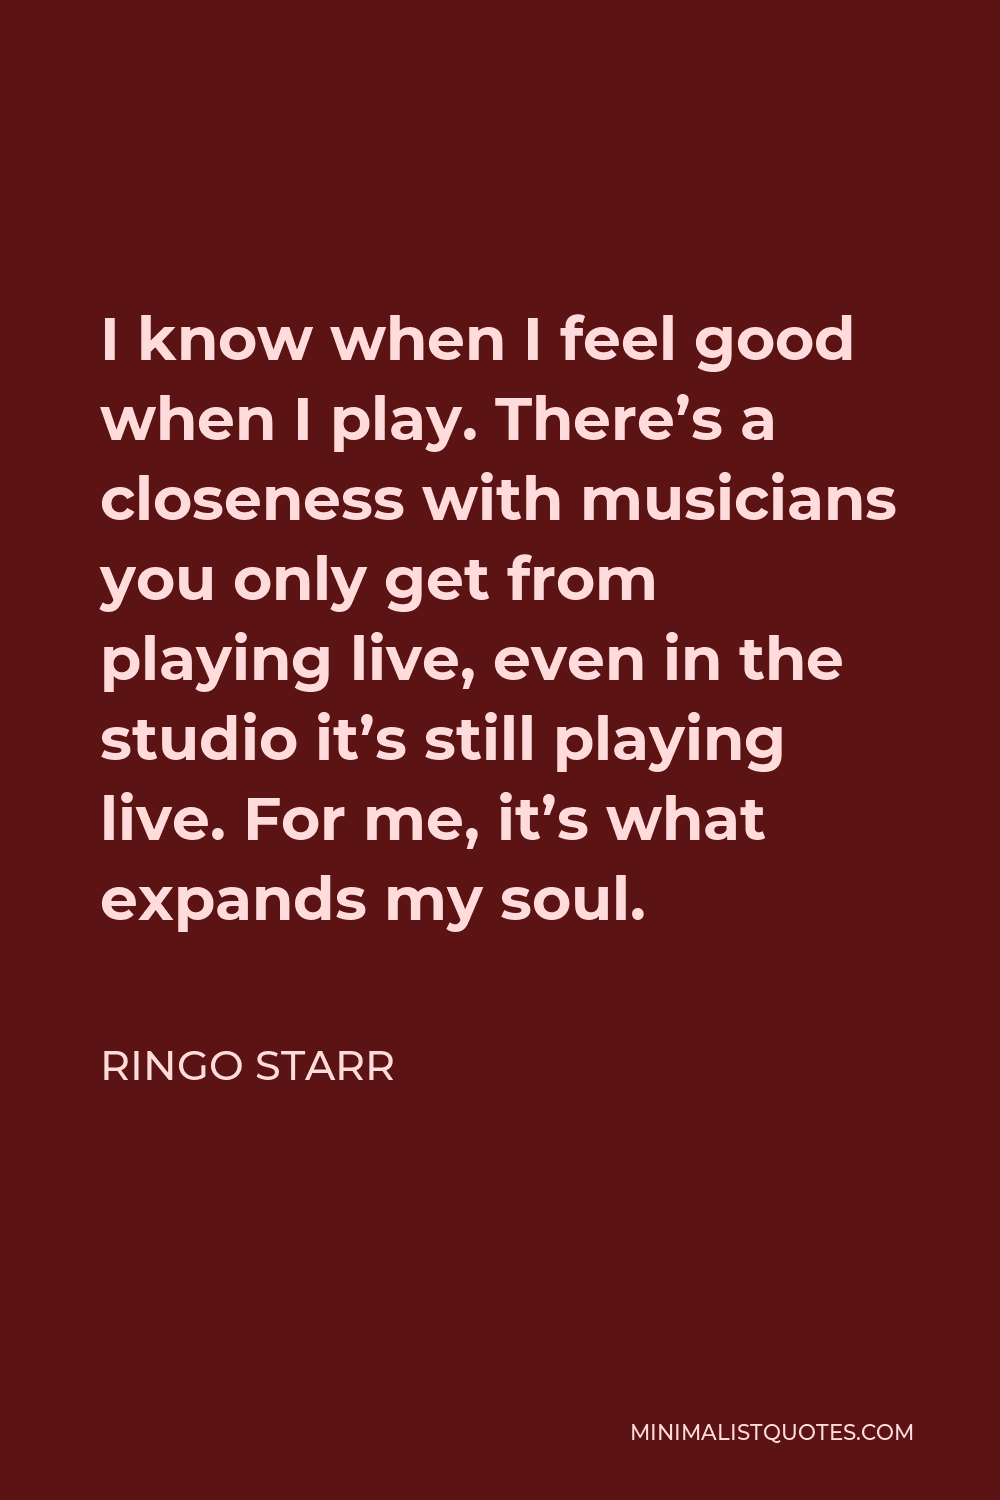 Ringo Starr Quote - I know when I feel good when I play. There’s a closeness with musicians you only get from playing live, even in the studio it’s still playing live. For me, it’s what expands my soul.